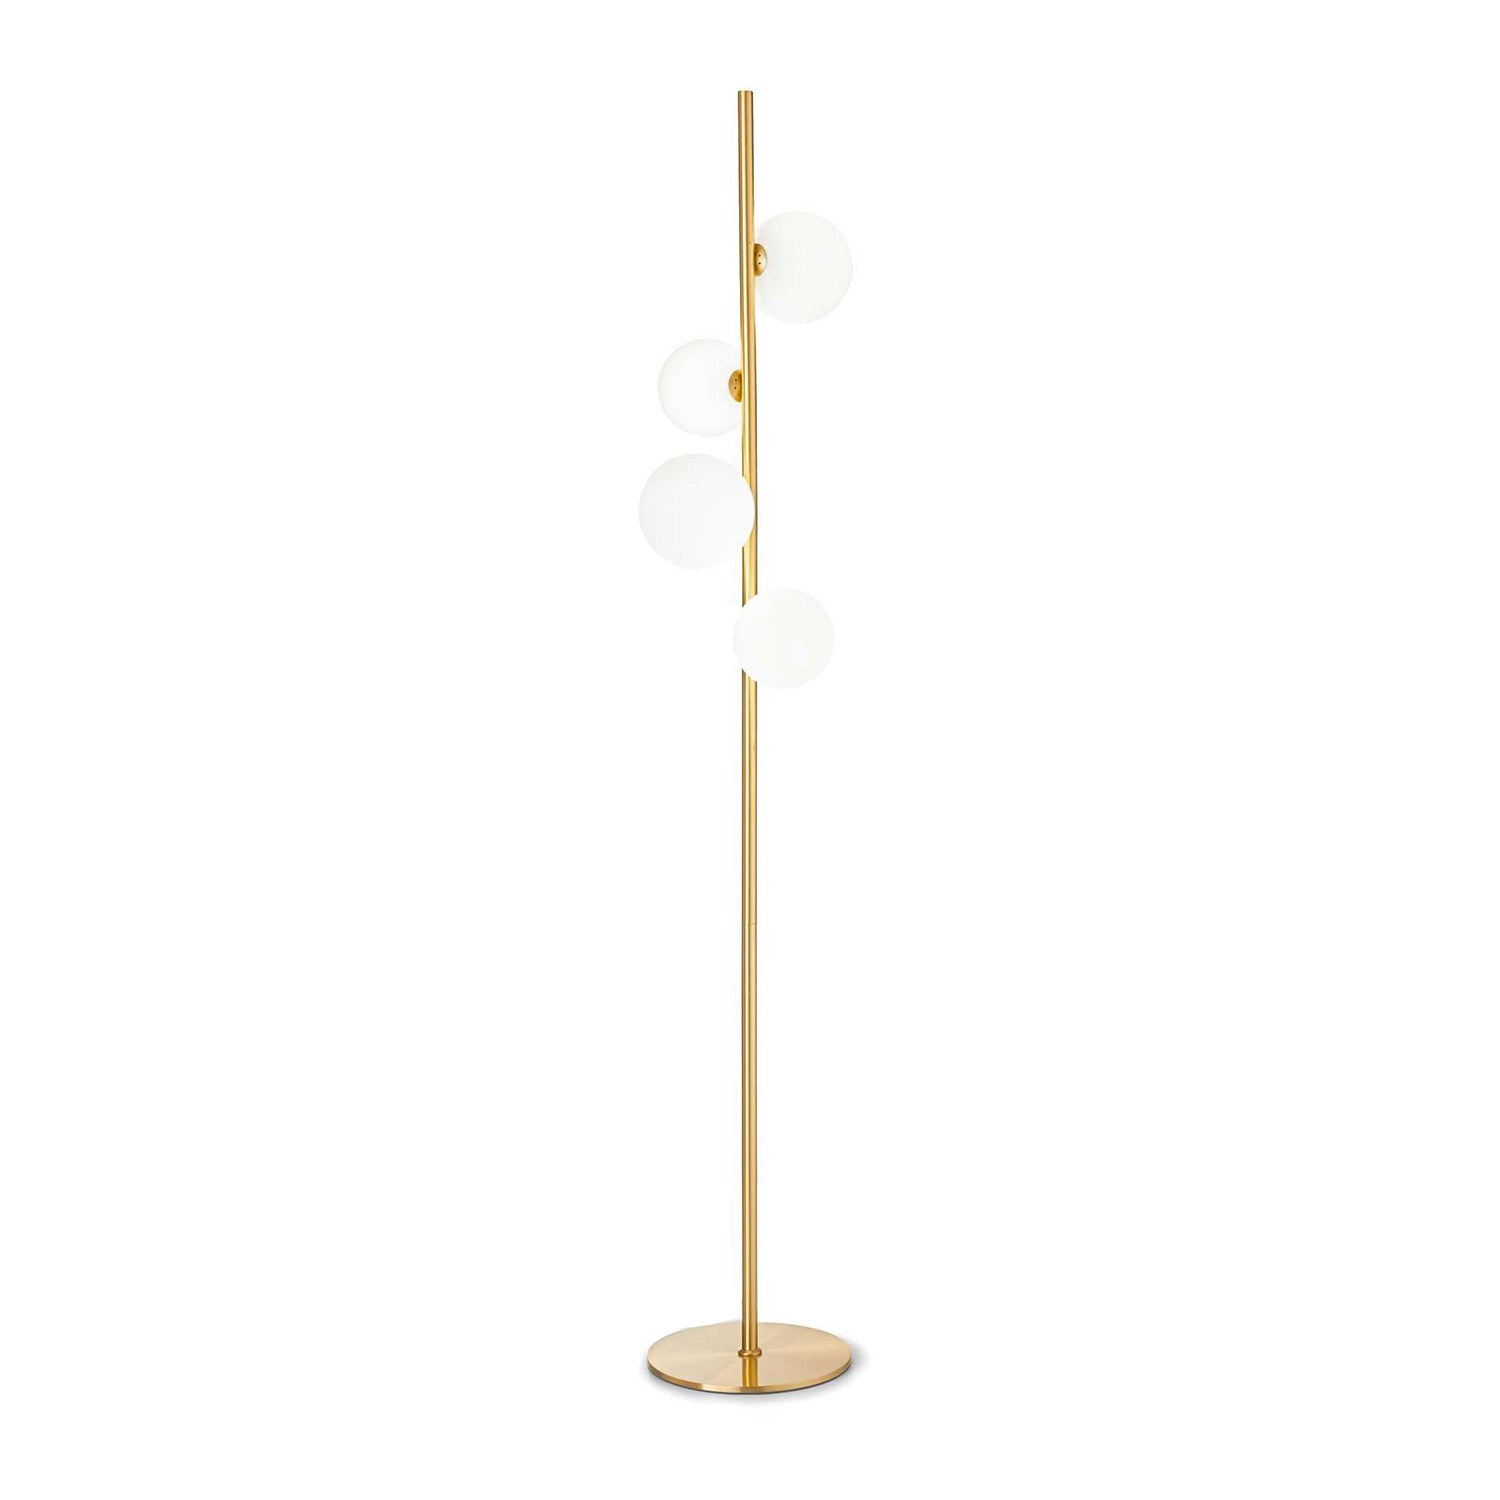 PERLAGE - Golden or smoked floor lamp and art deco glass balls